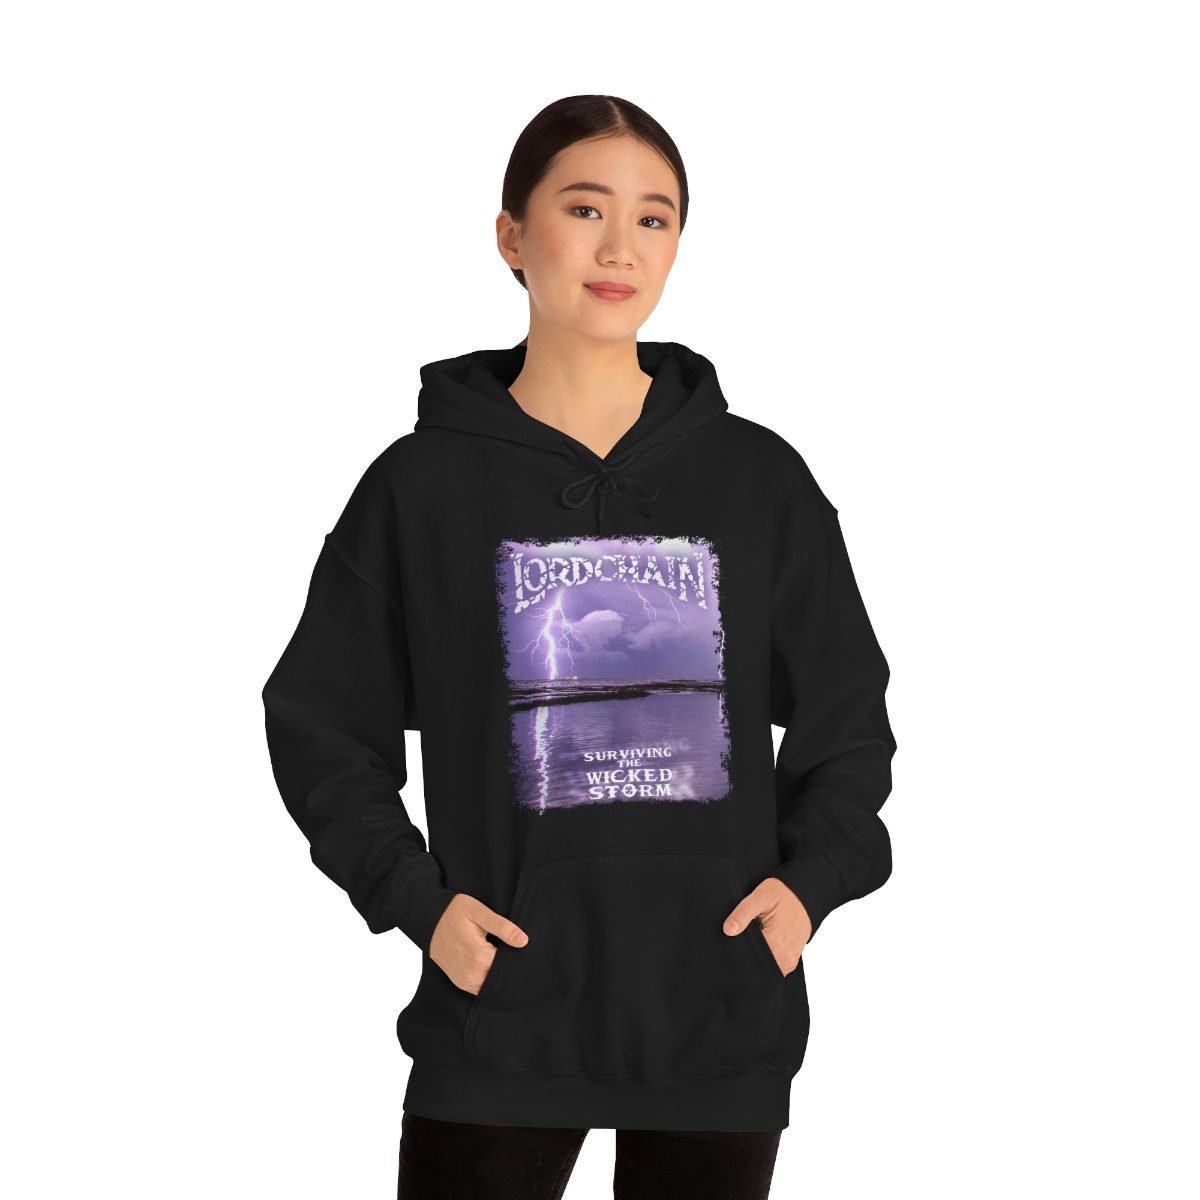 Lordchain – Surviving The Wicked Storm Pullover Hooded Sweatshirt 185MD